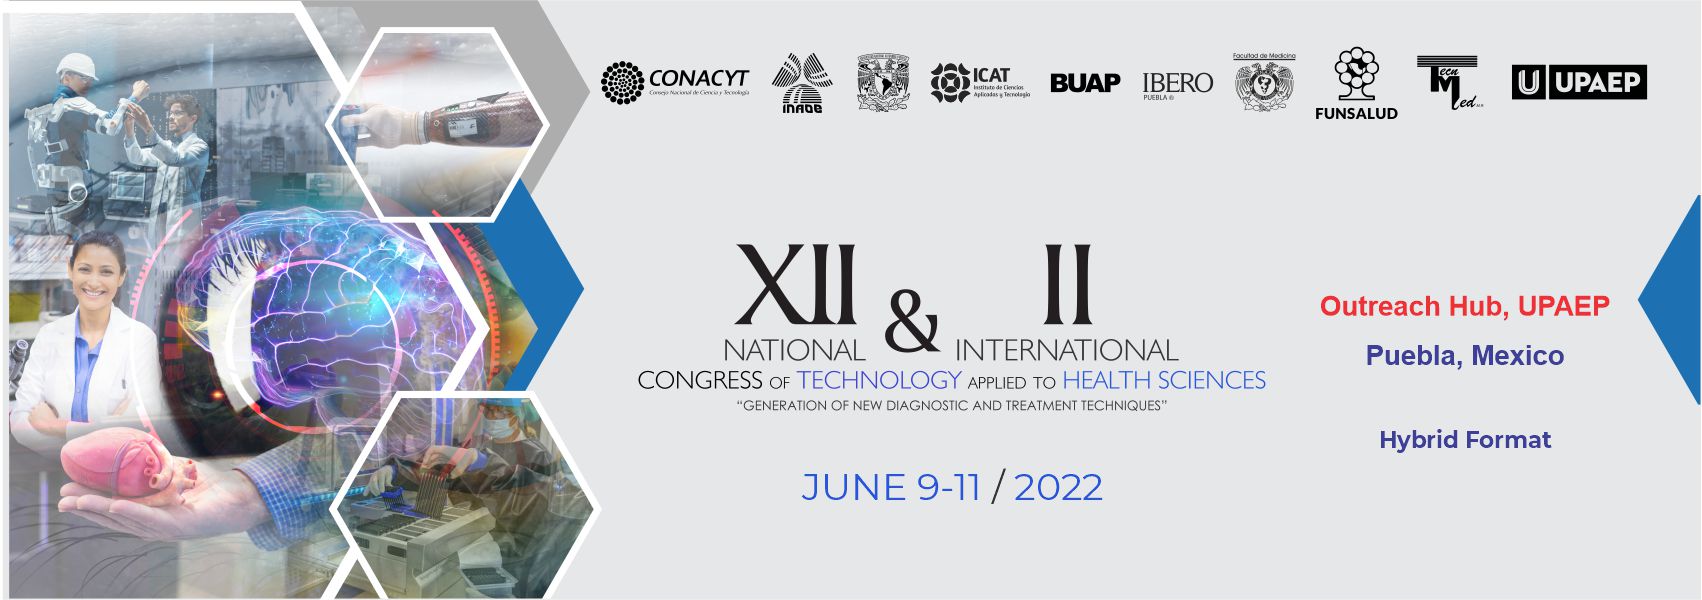 XII National Congress of Technology Applied to Health Sciences